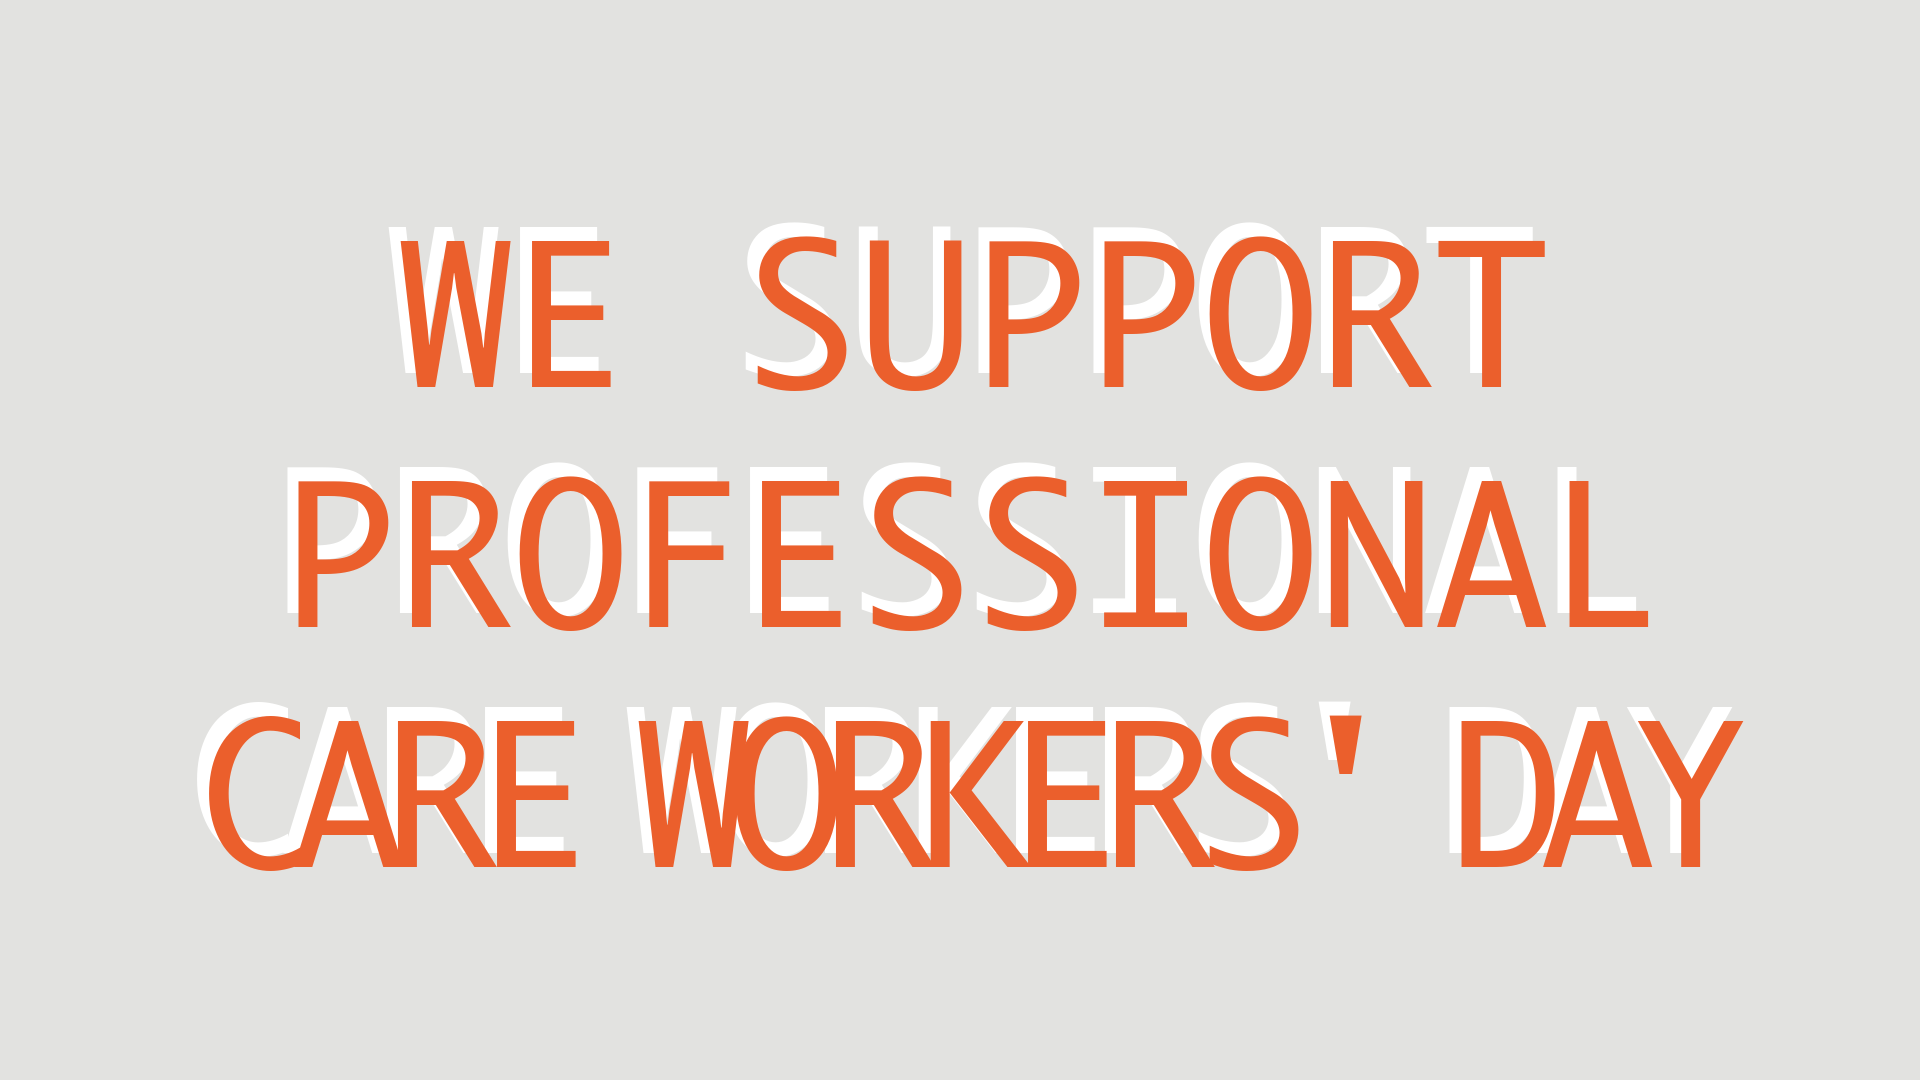 We support professional care workers' day